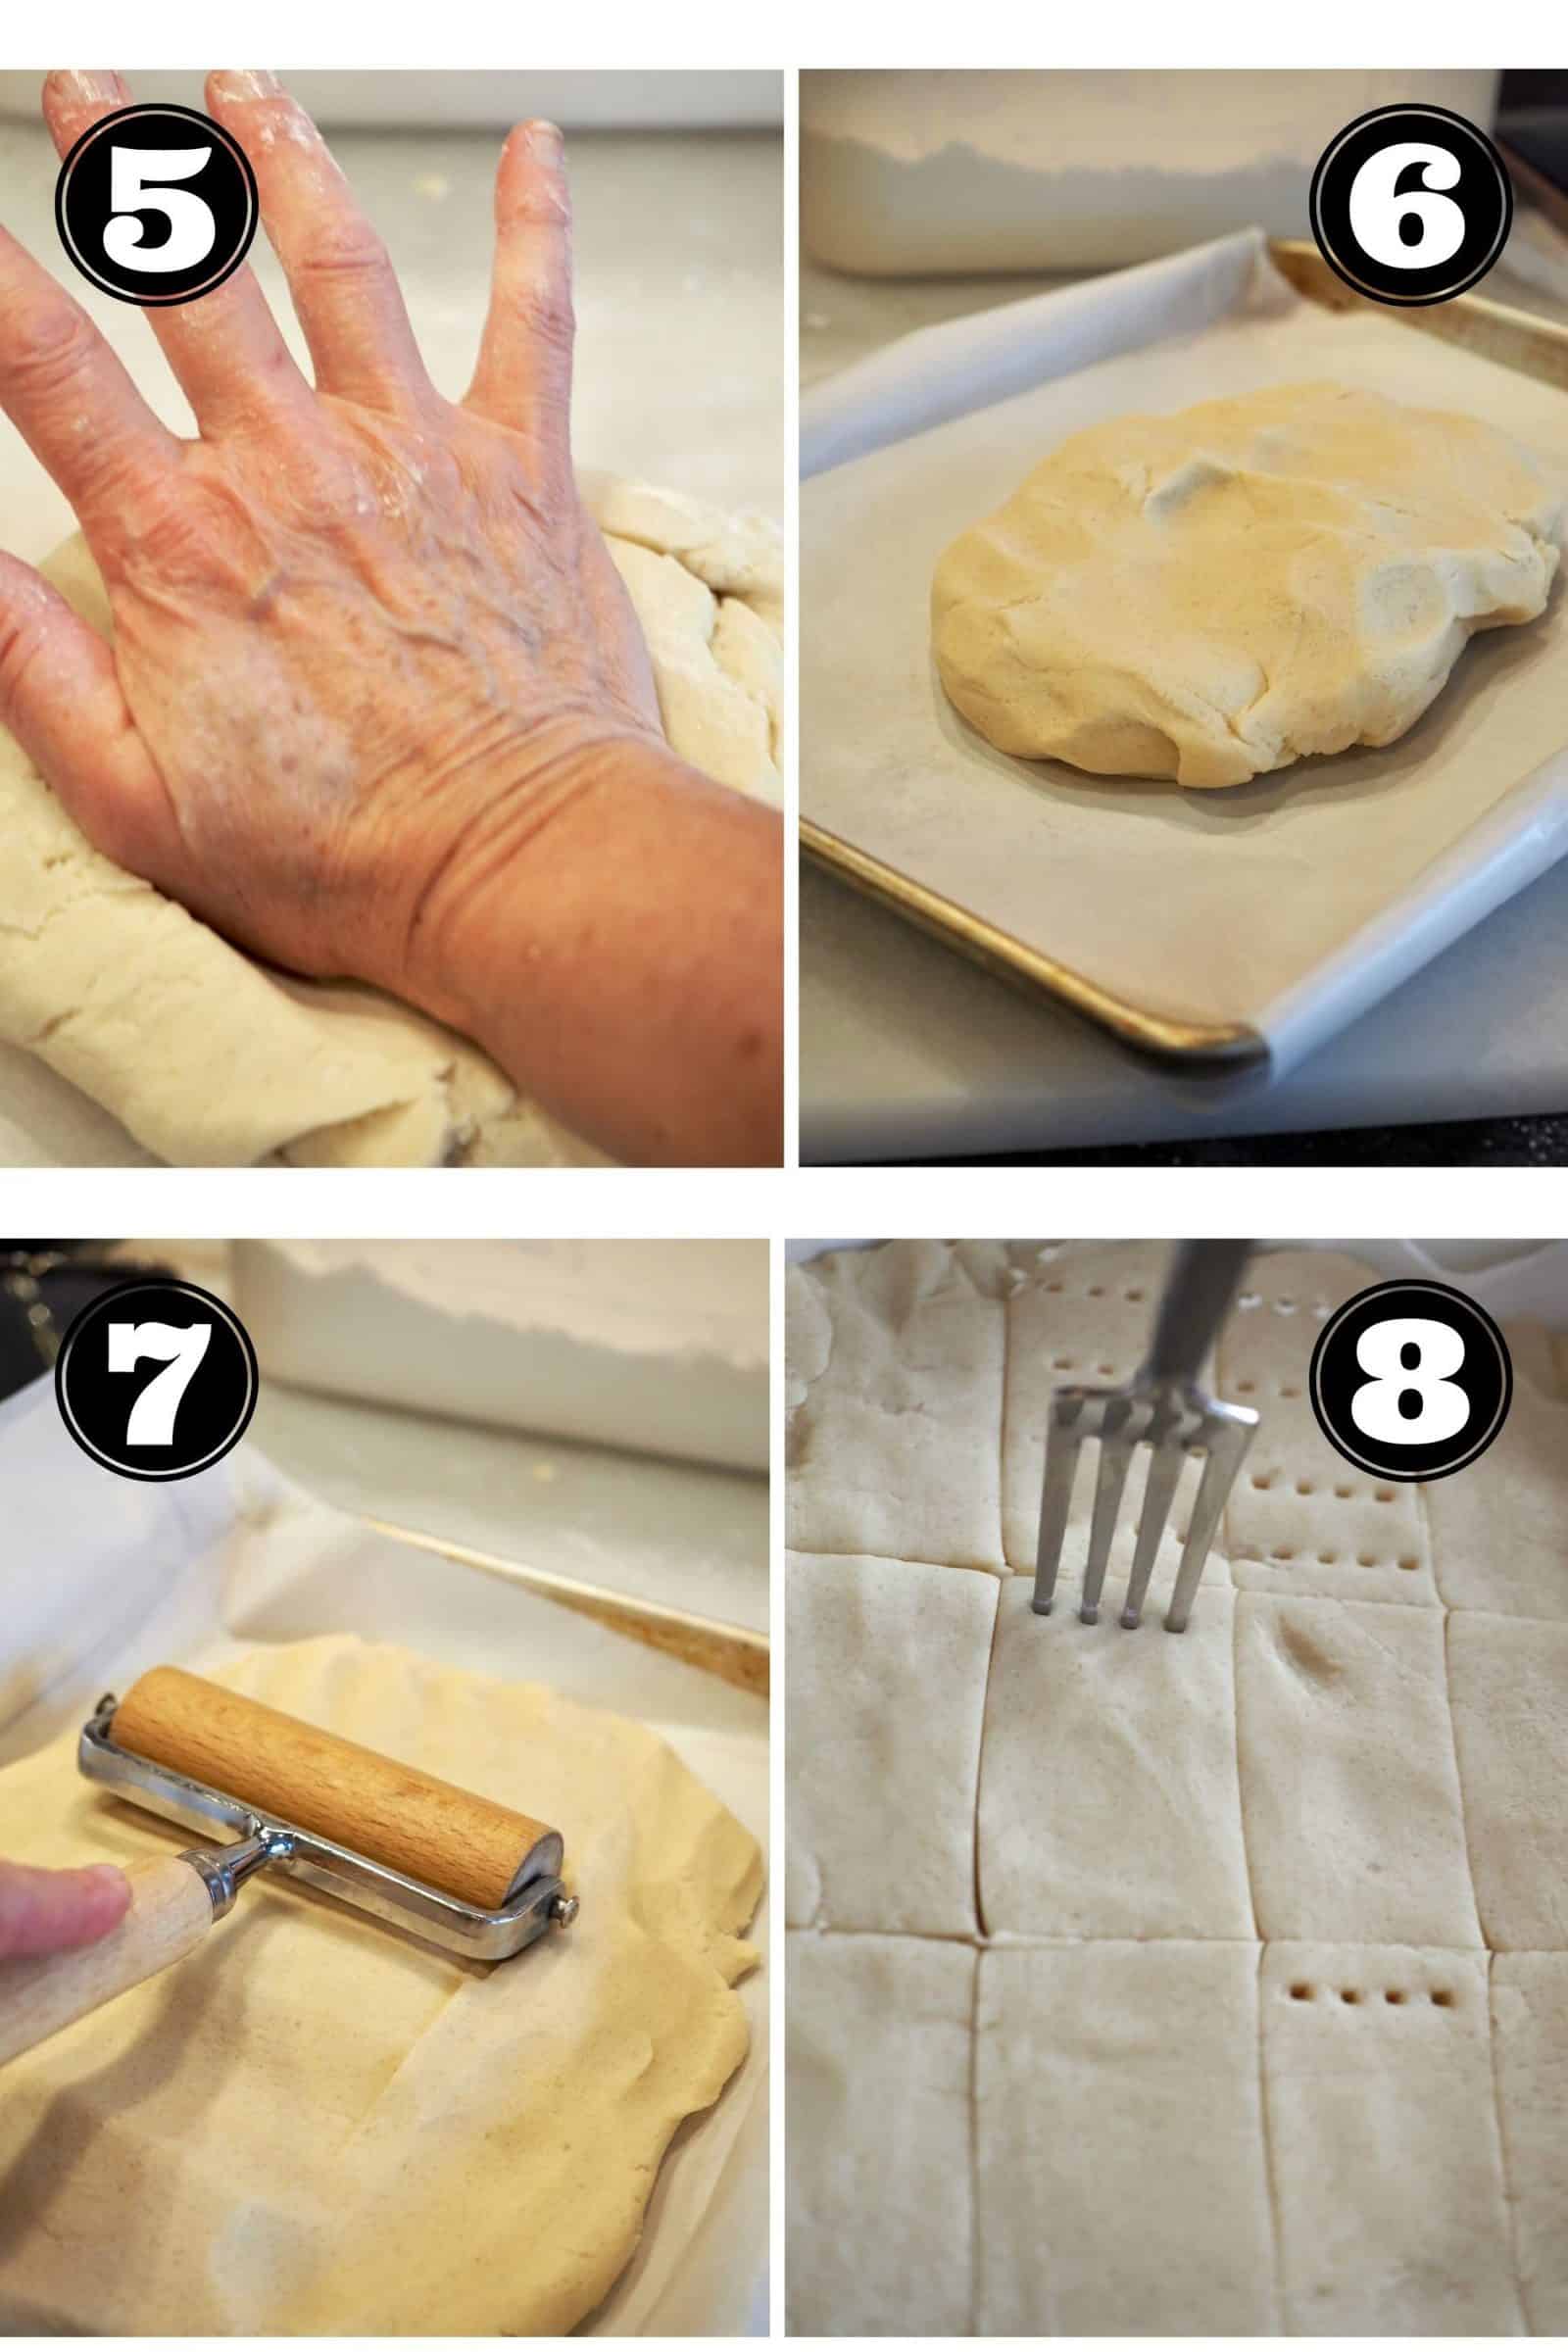 Process shots for classic shortbread cookies. 5. kneading dough smooth. Placing in jelly roll pan. 7. smoothing into pan. 8. pricking with fork and scoring.